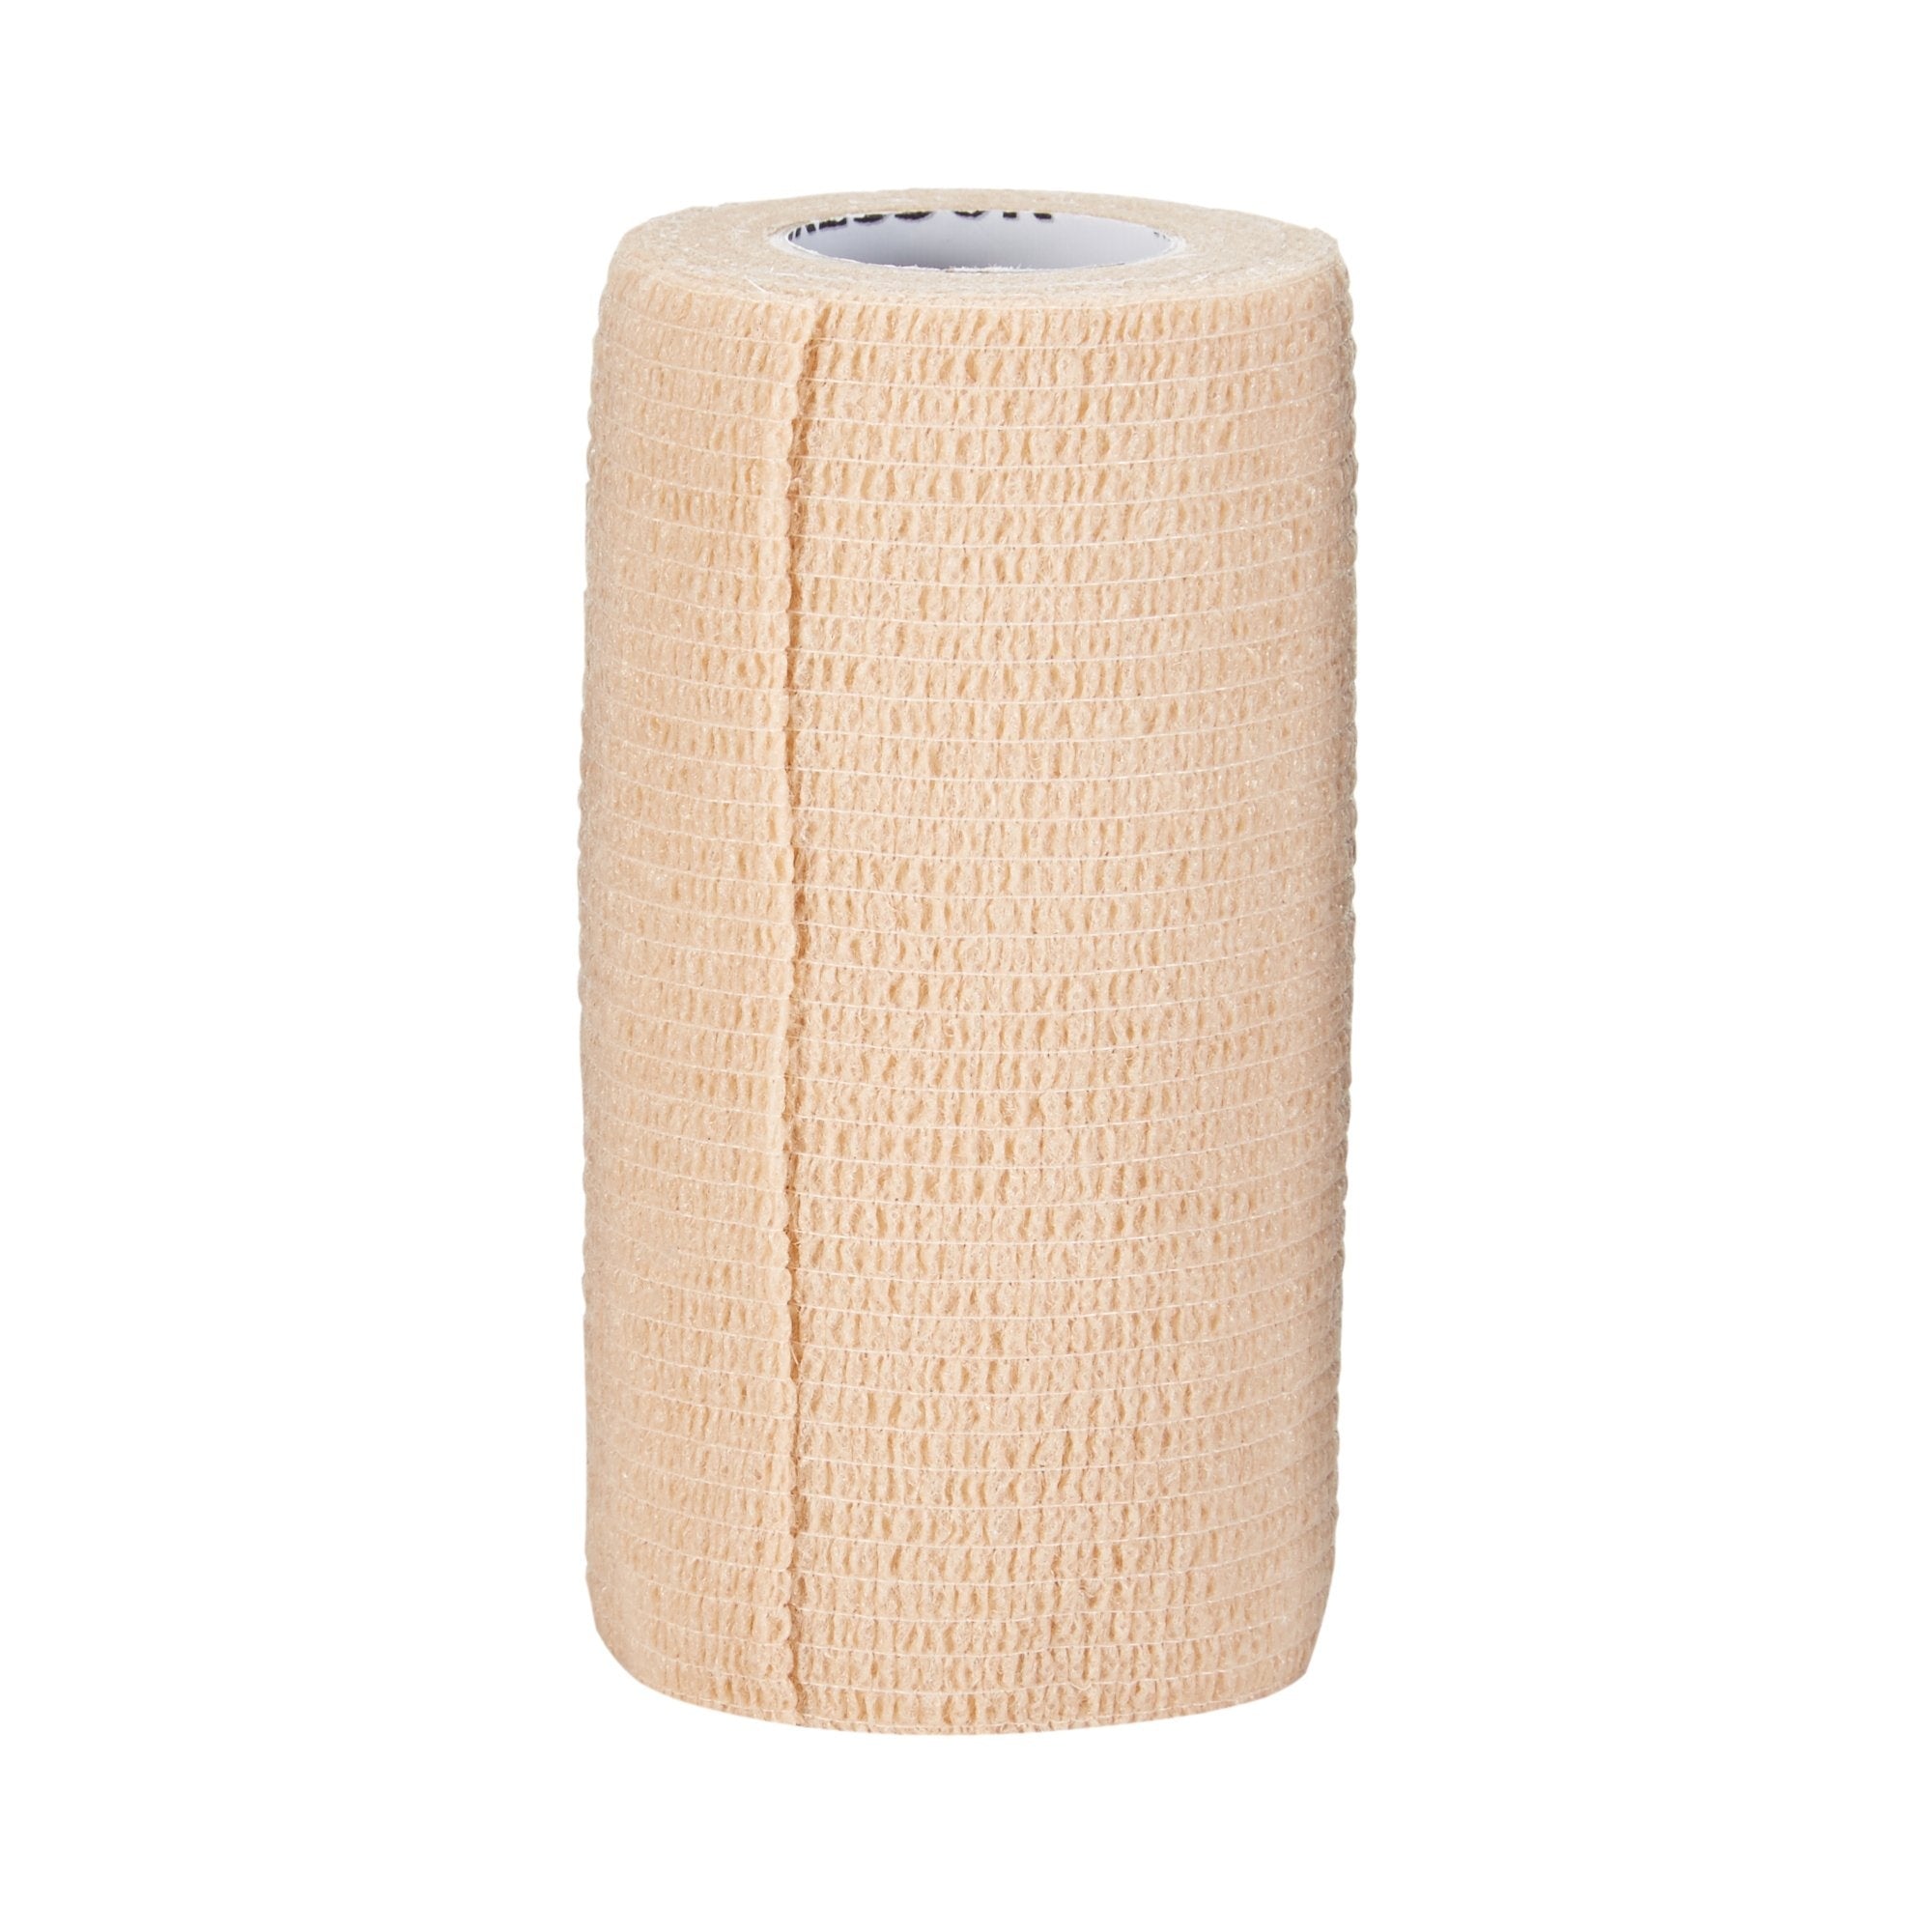 cohesive bandage 4 in x 5 yd - tan